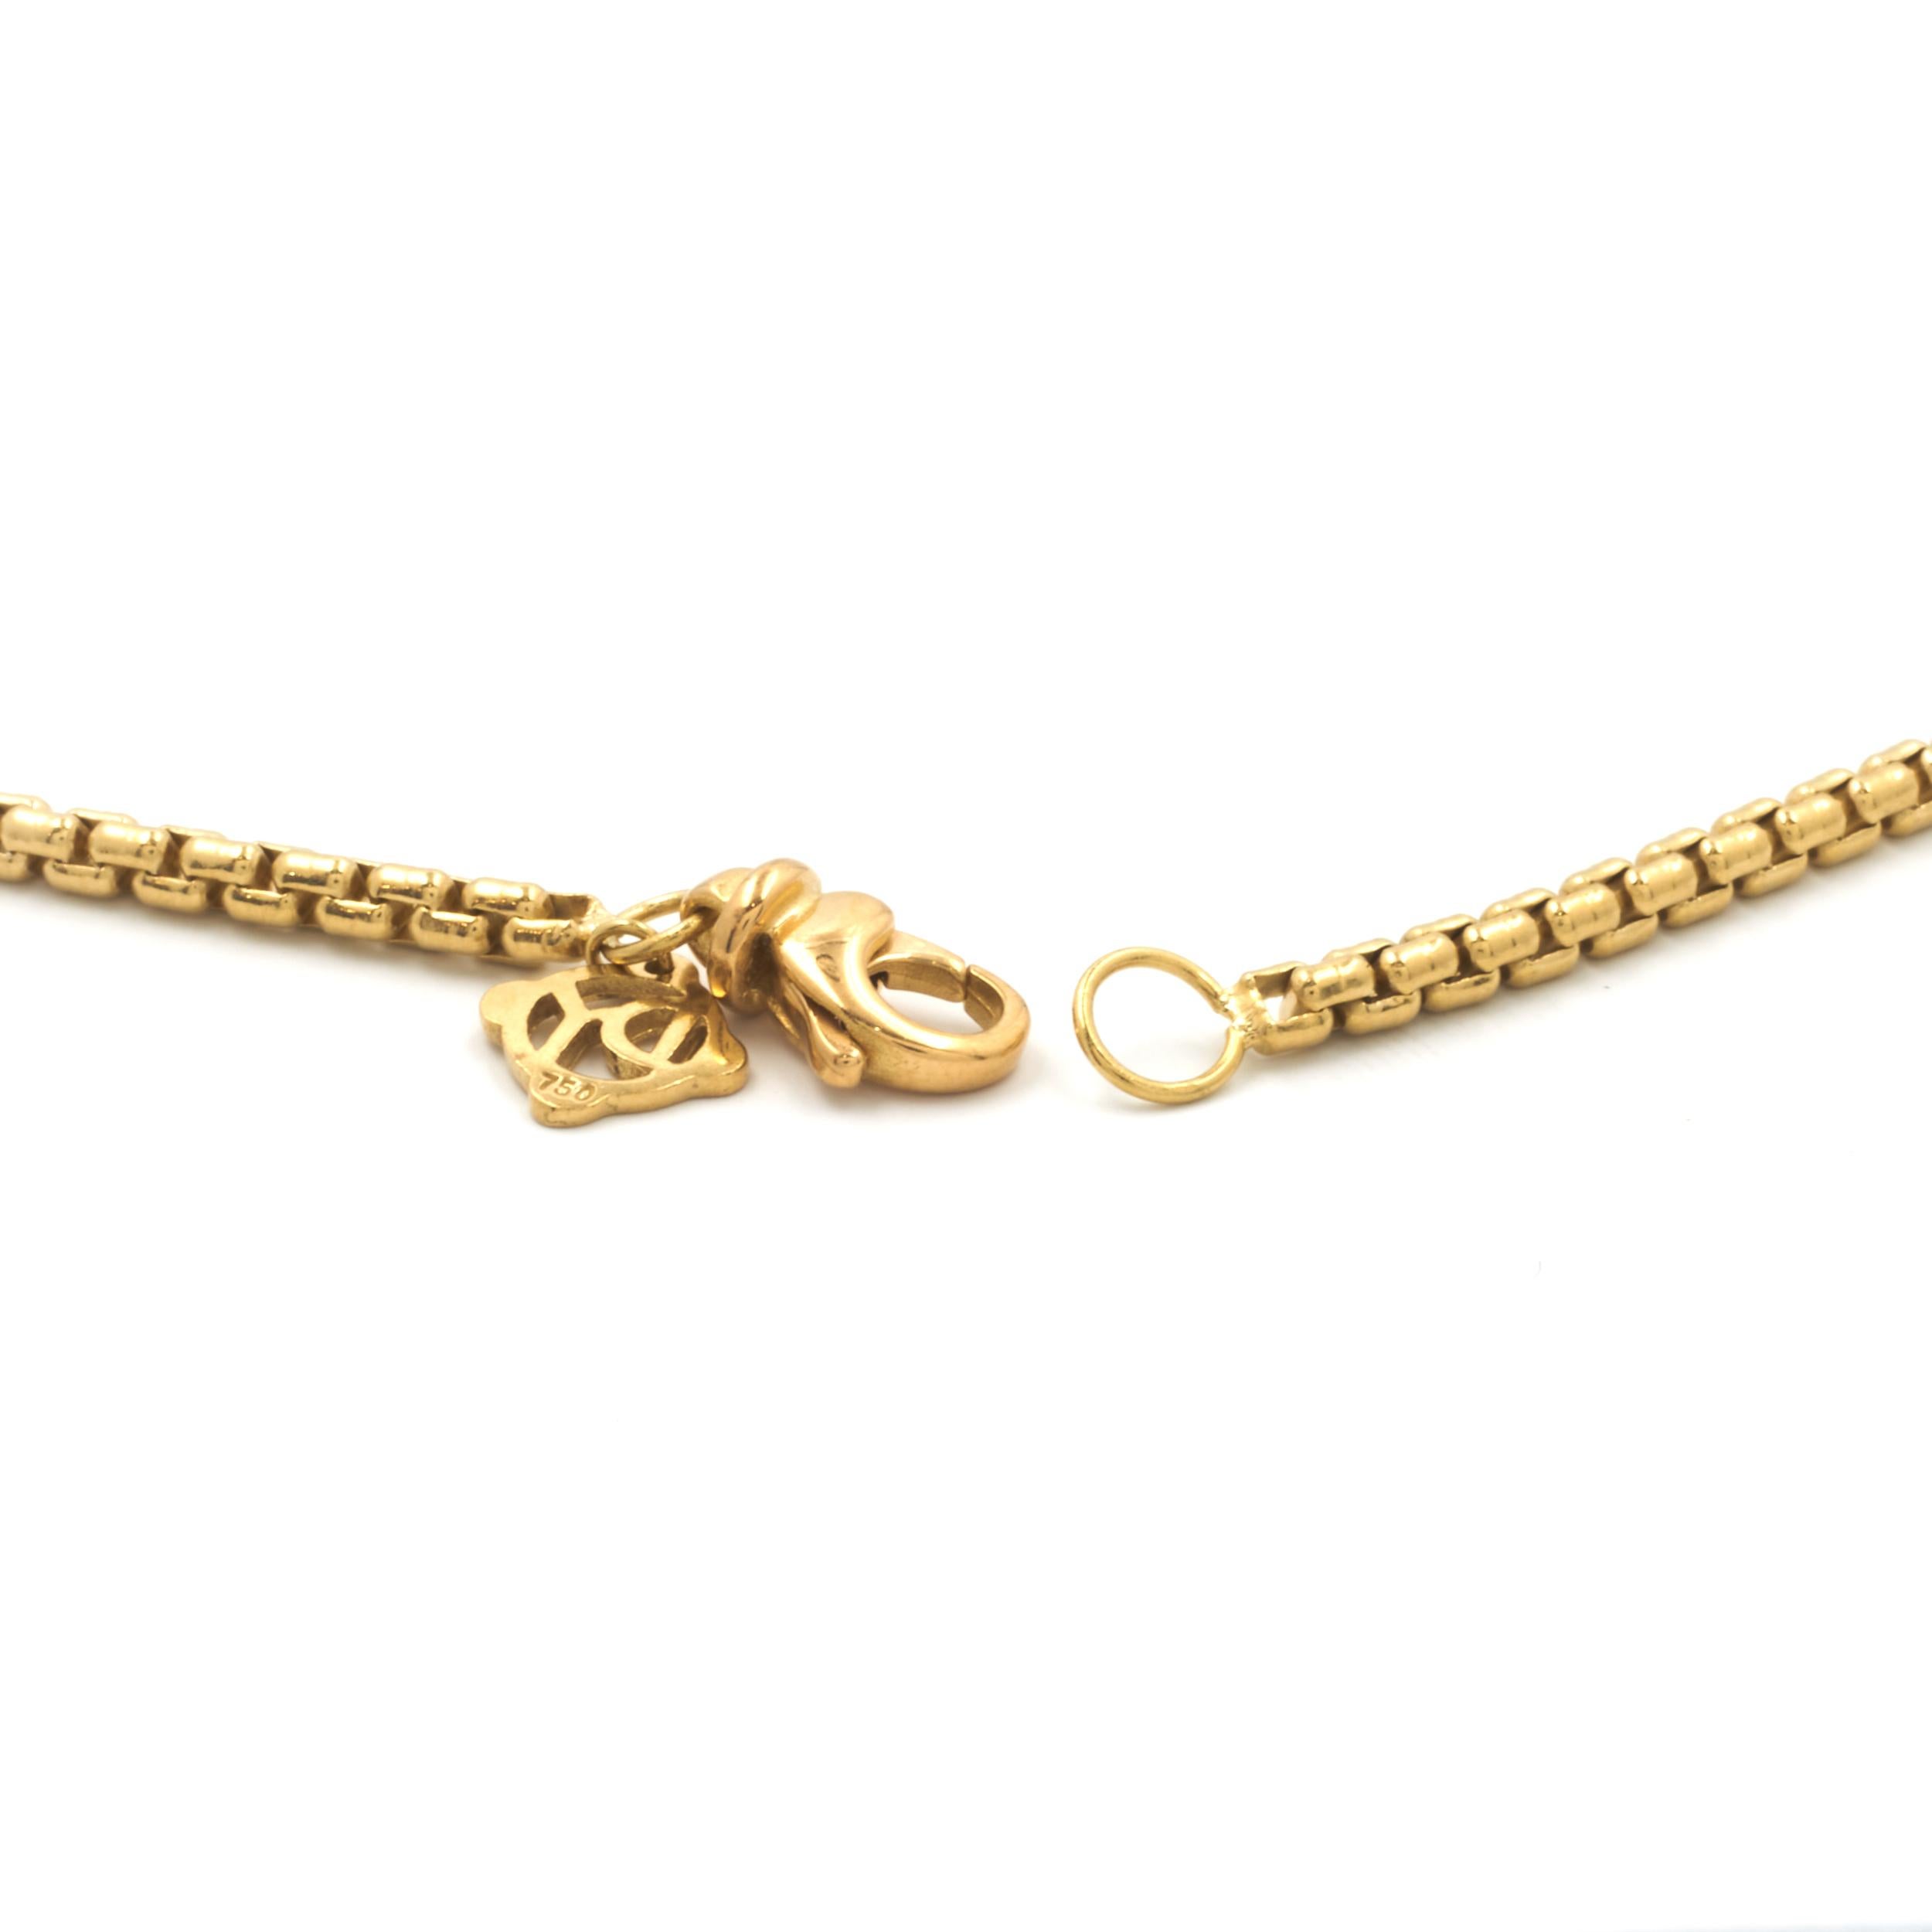 Designer: David Yurman
Material: 18K yellow gold
Weight: 23.43 grams
Measurement: necklace measures 18-inches in length, 2.7mm wide


